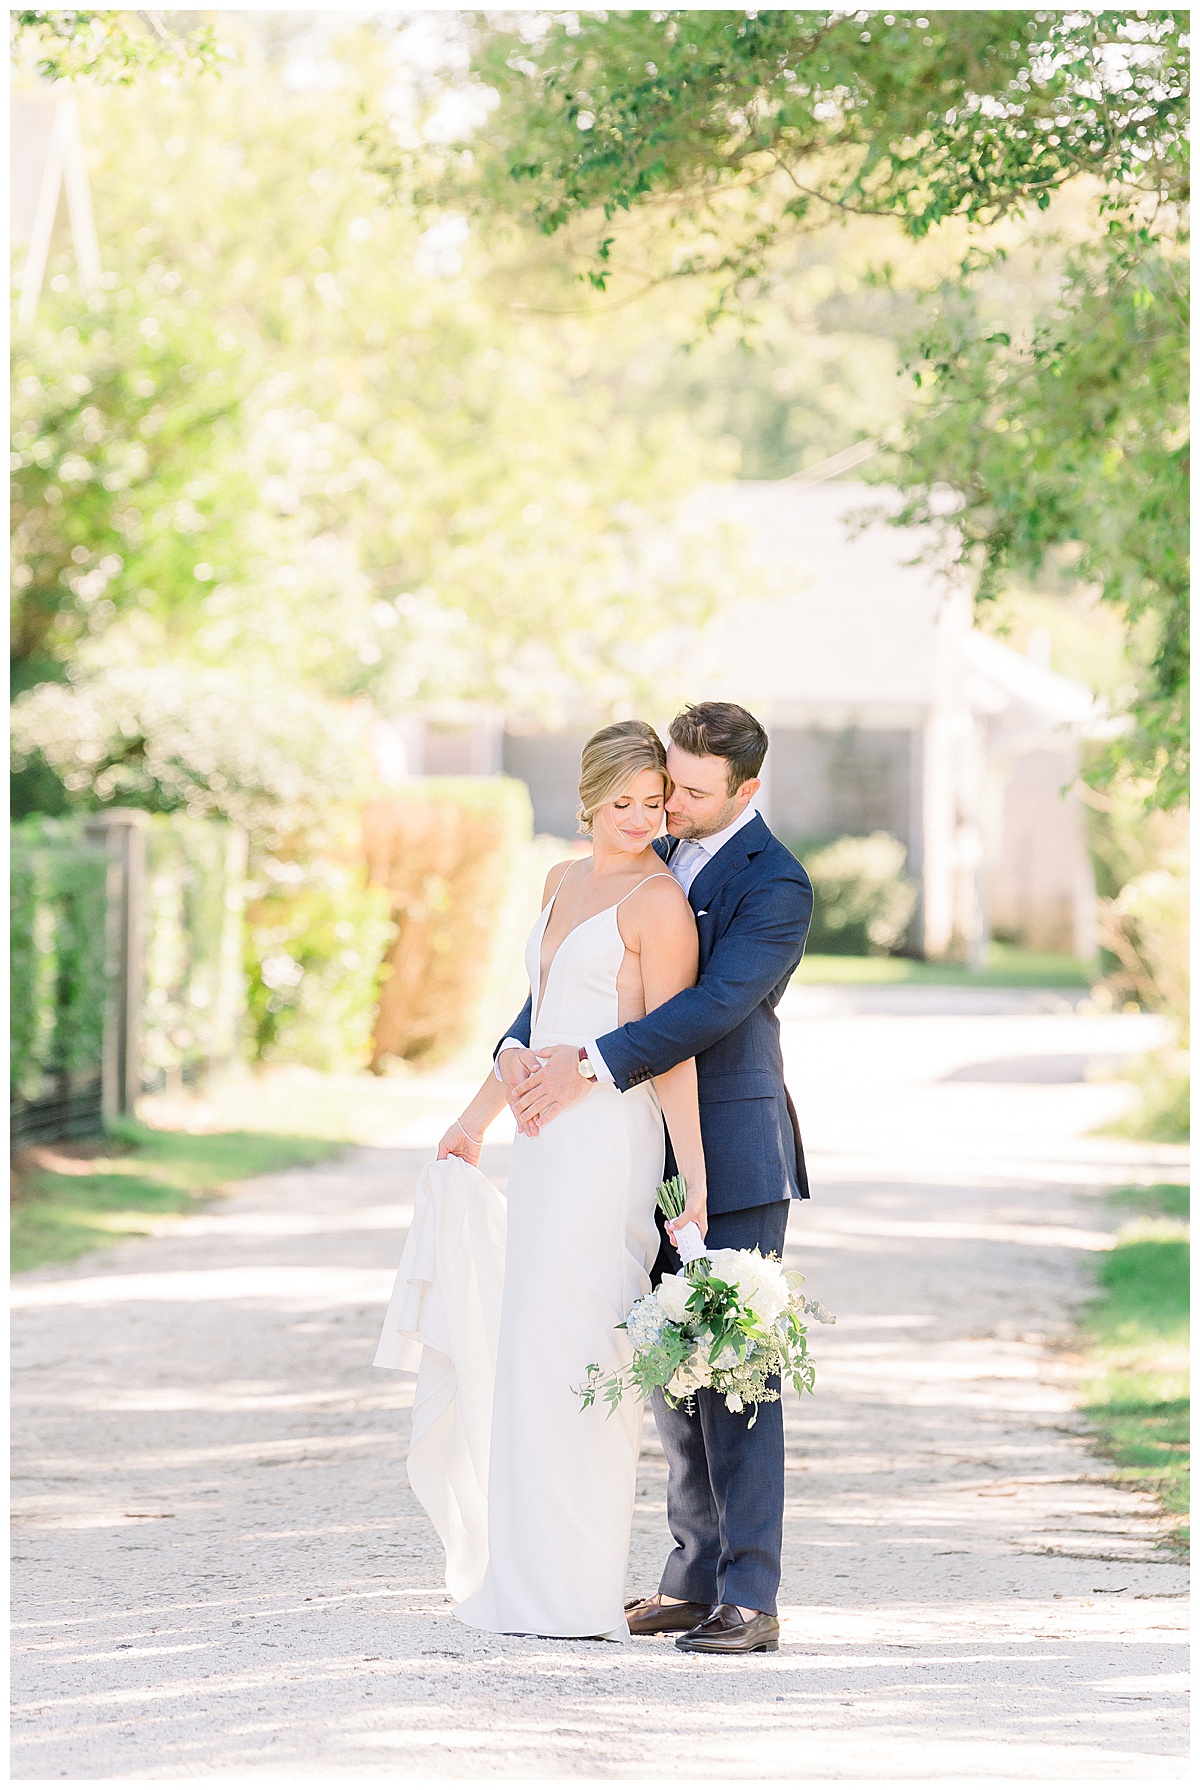 Haley and Michael's Nantucket Wedding Portraits in Sconset